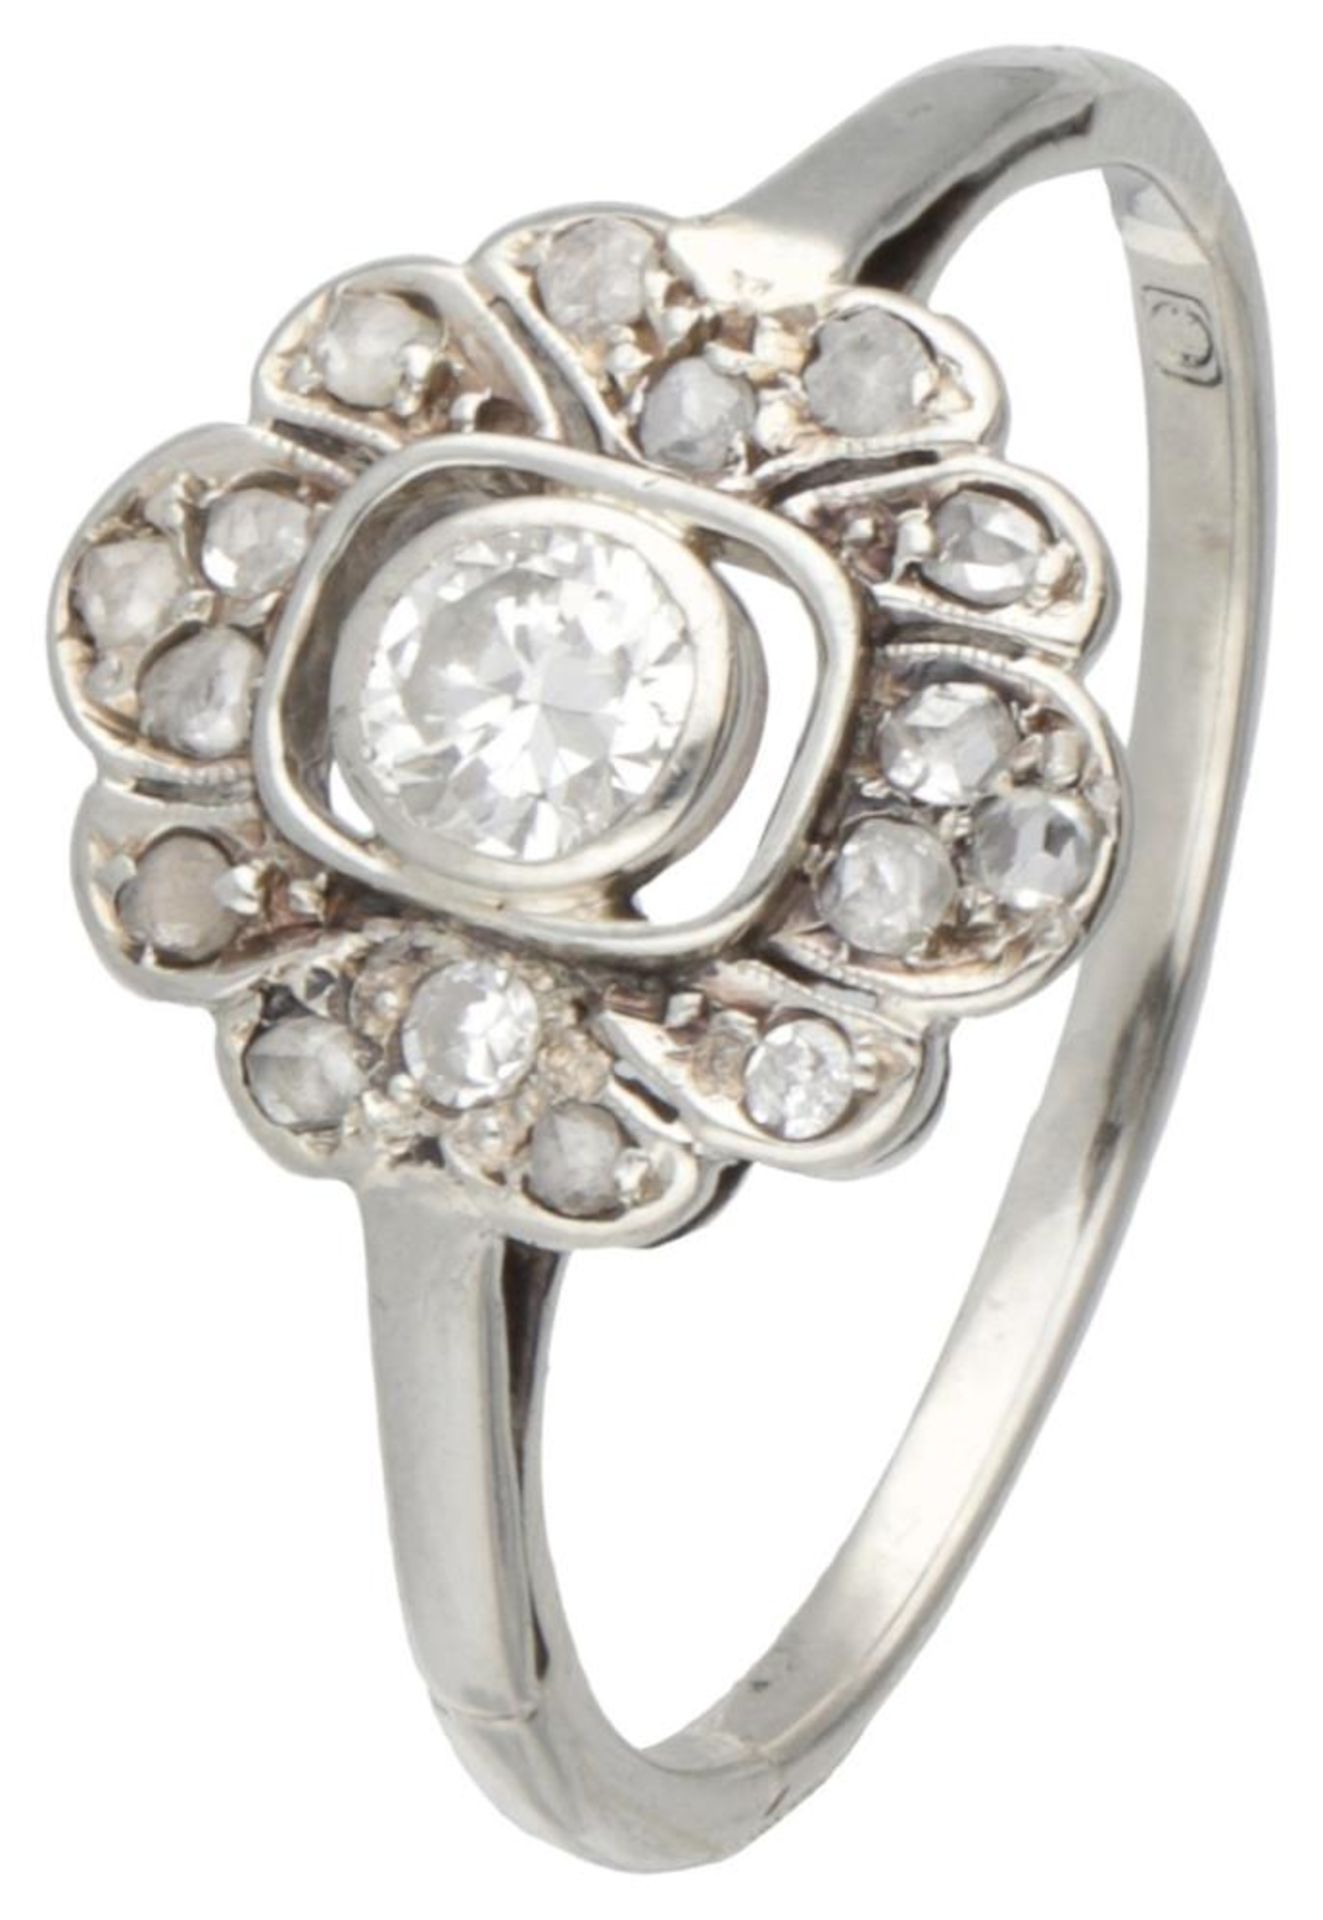 14K. White gold antique ring set with approx. 0.22 ct. diamond.